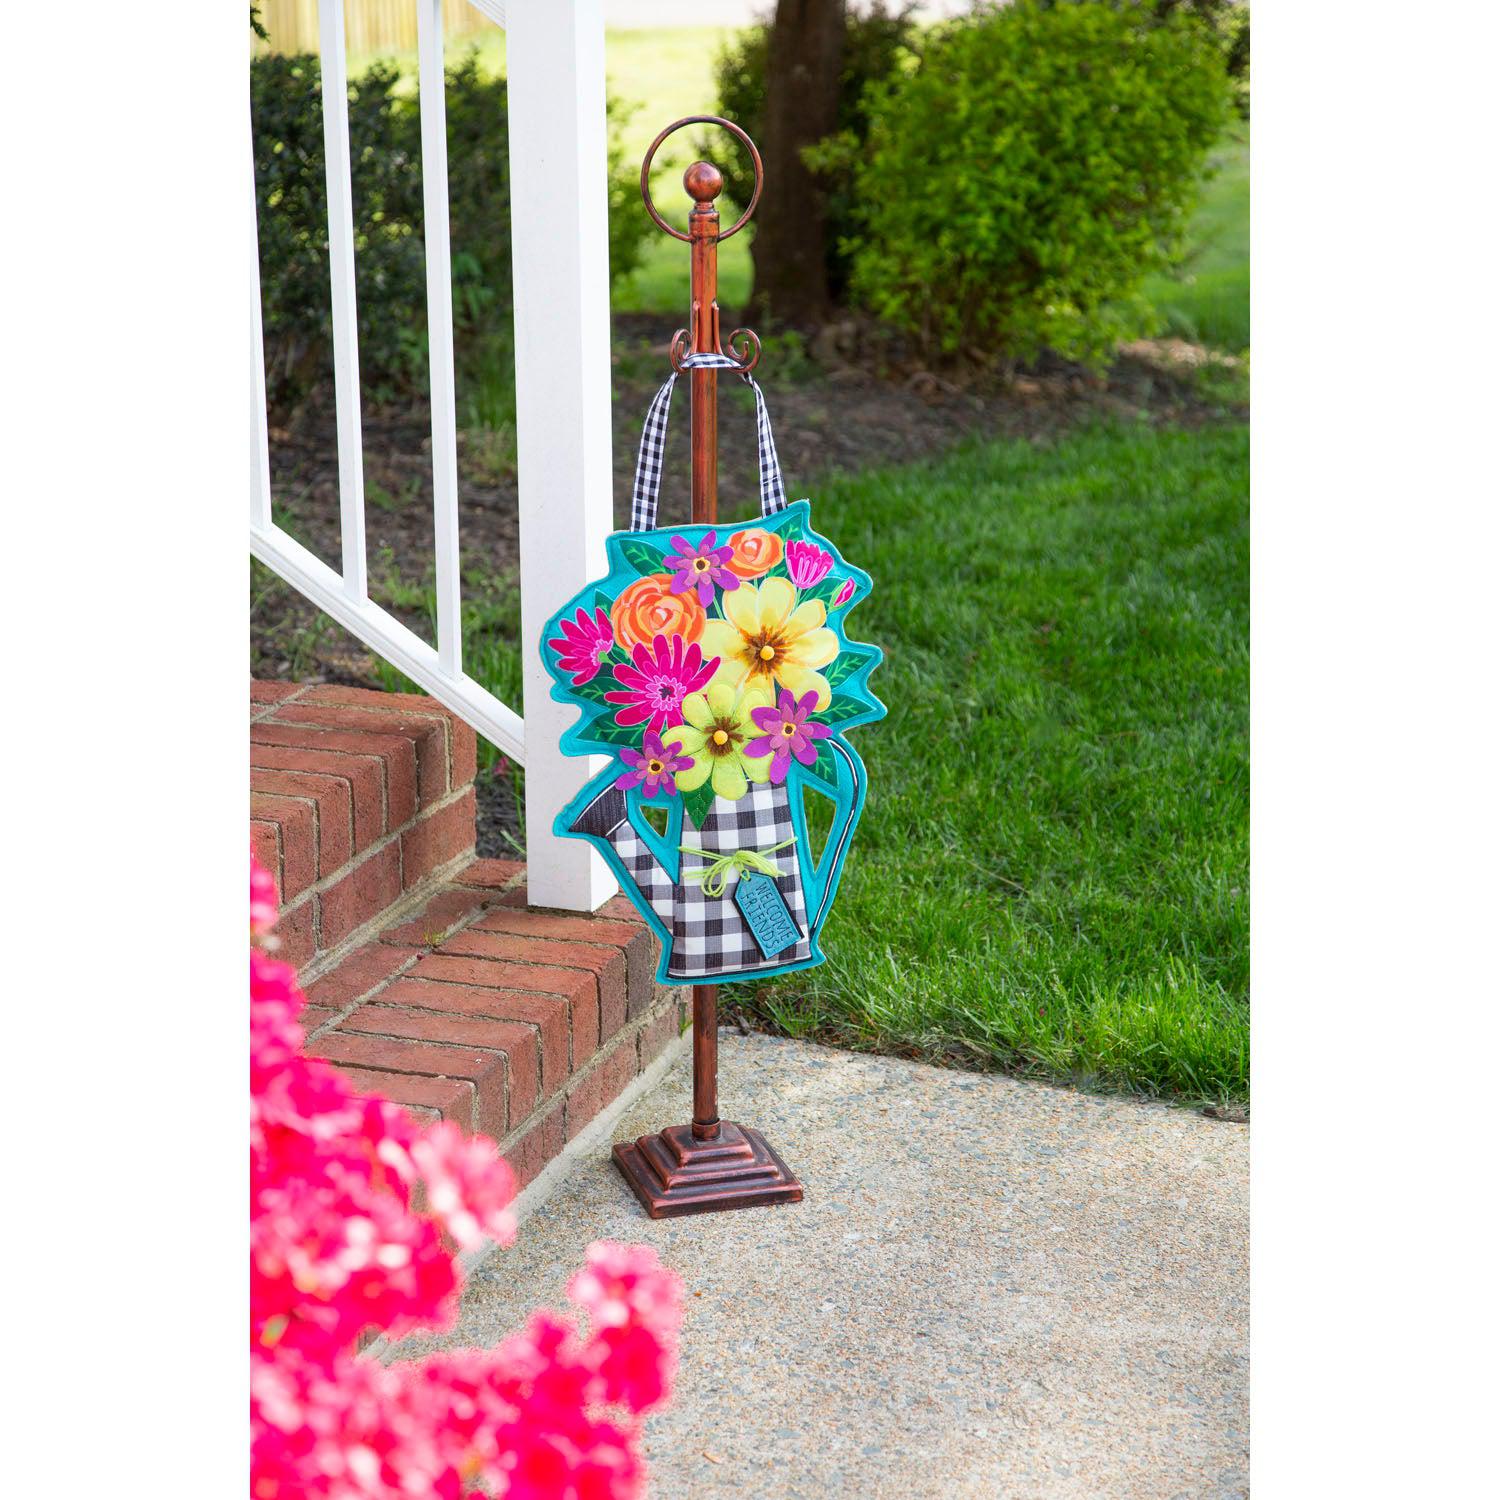 The Buffalo Check Watering Can door décor features a black checked watering can holding a bouquet of flowers and a tag with the words "Welcome Friends". 